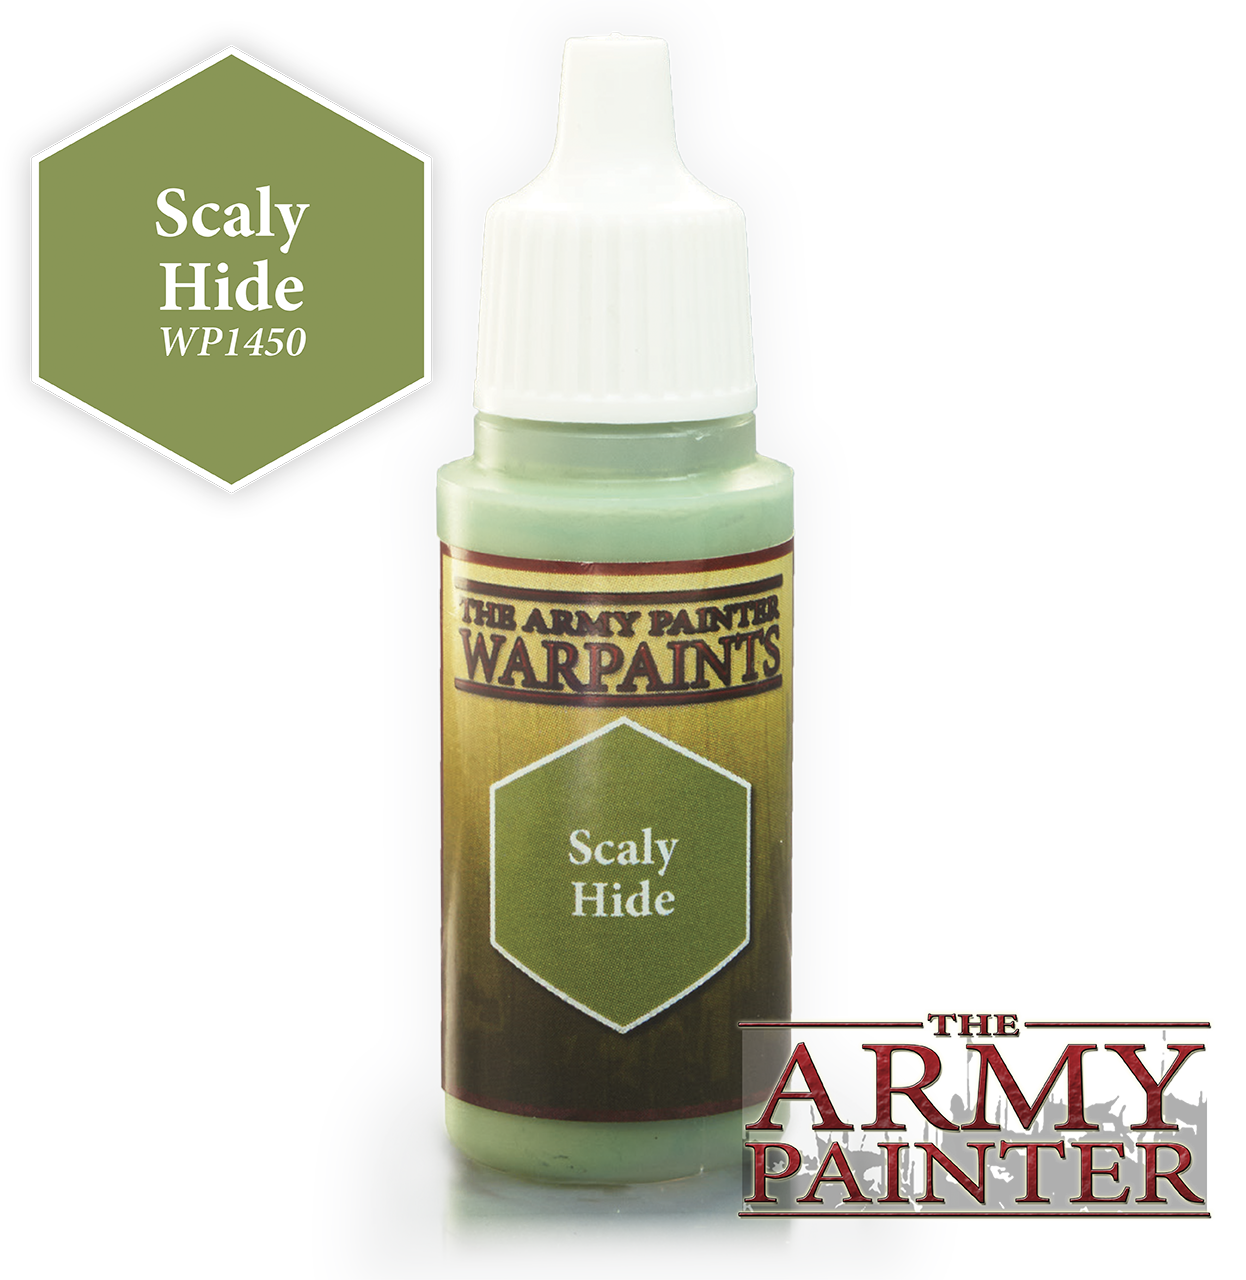 The ARMY PAINTER: Acrylics Warpaint - Scaly Hide | Tacoma Games